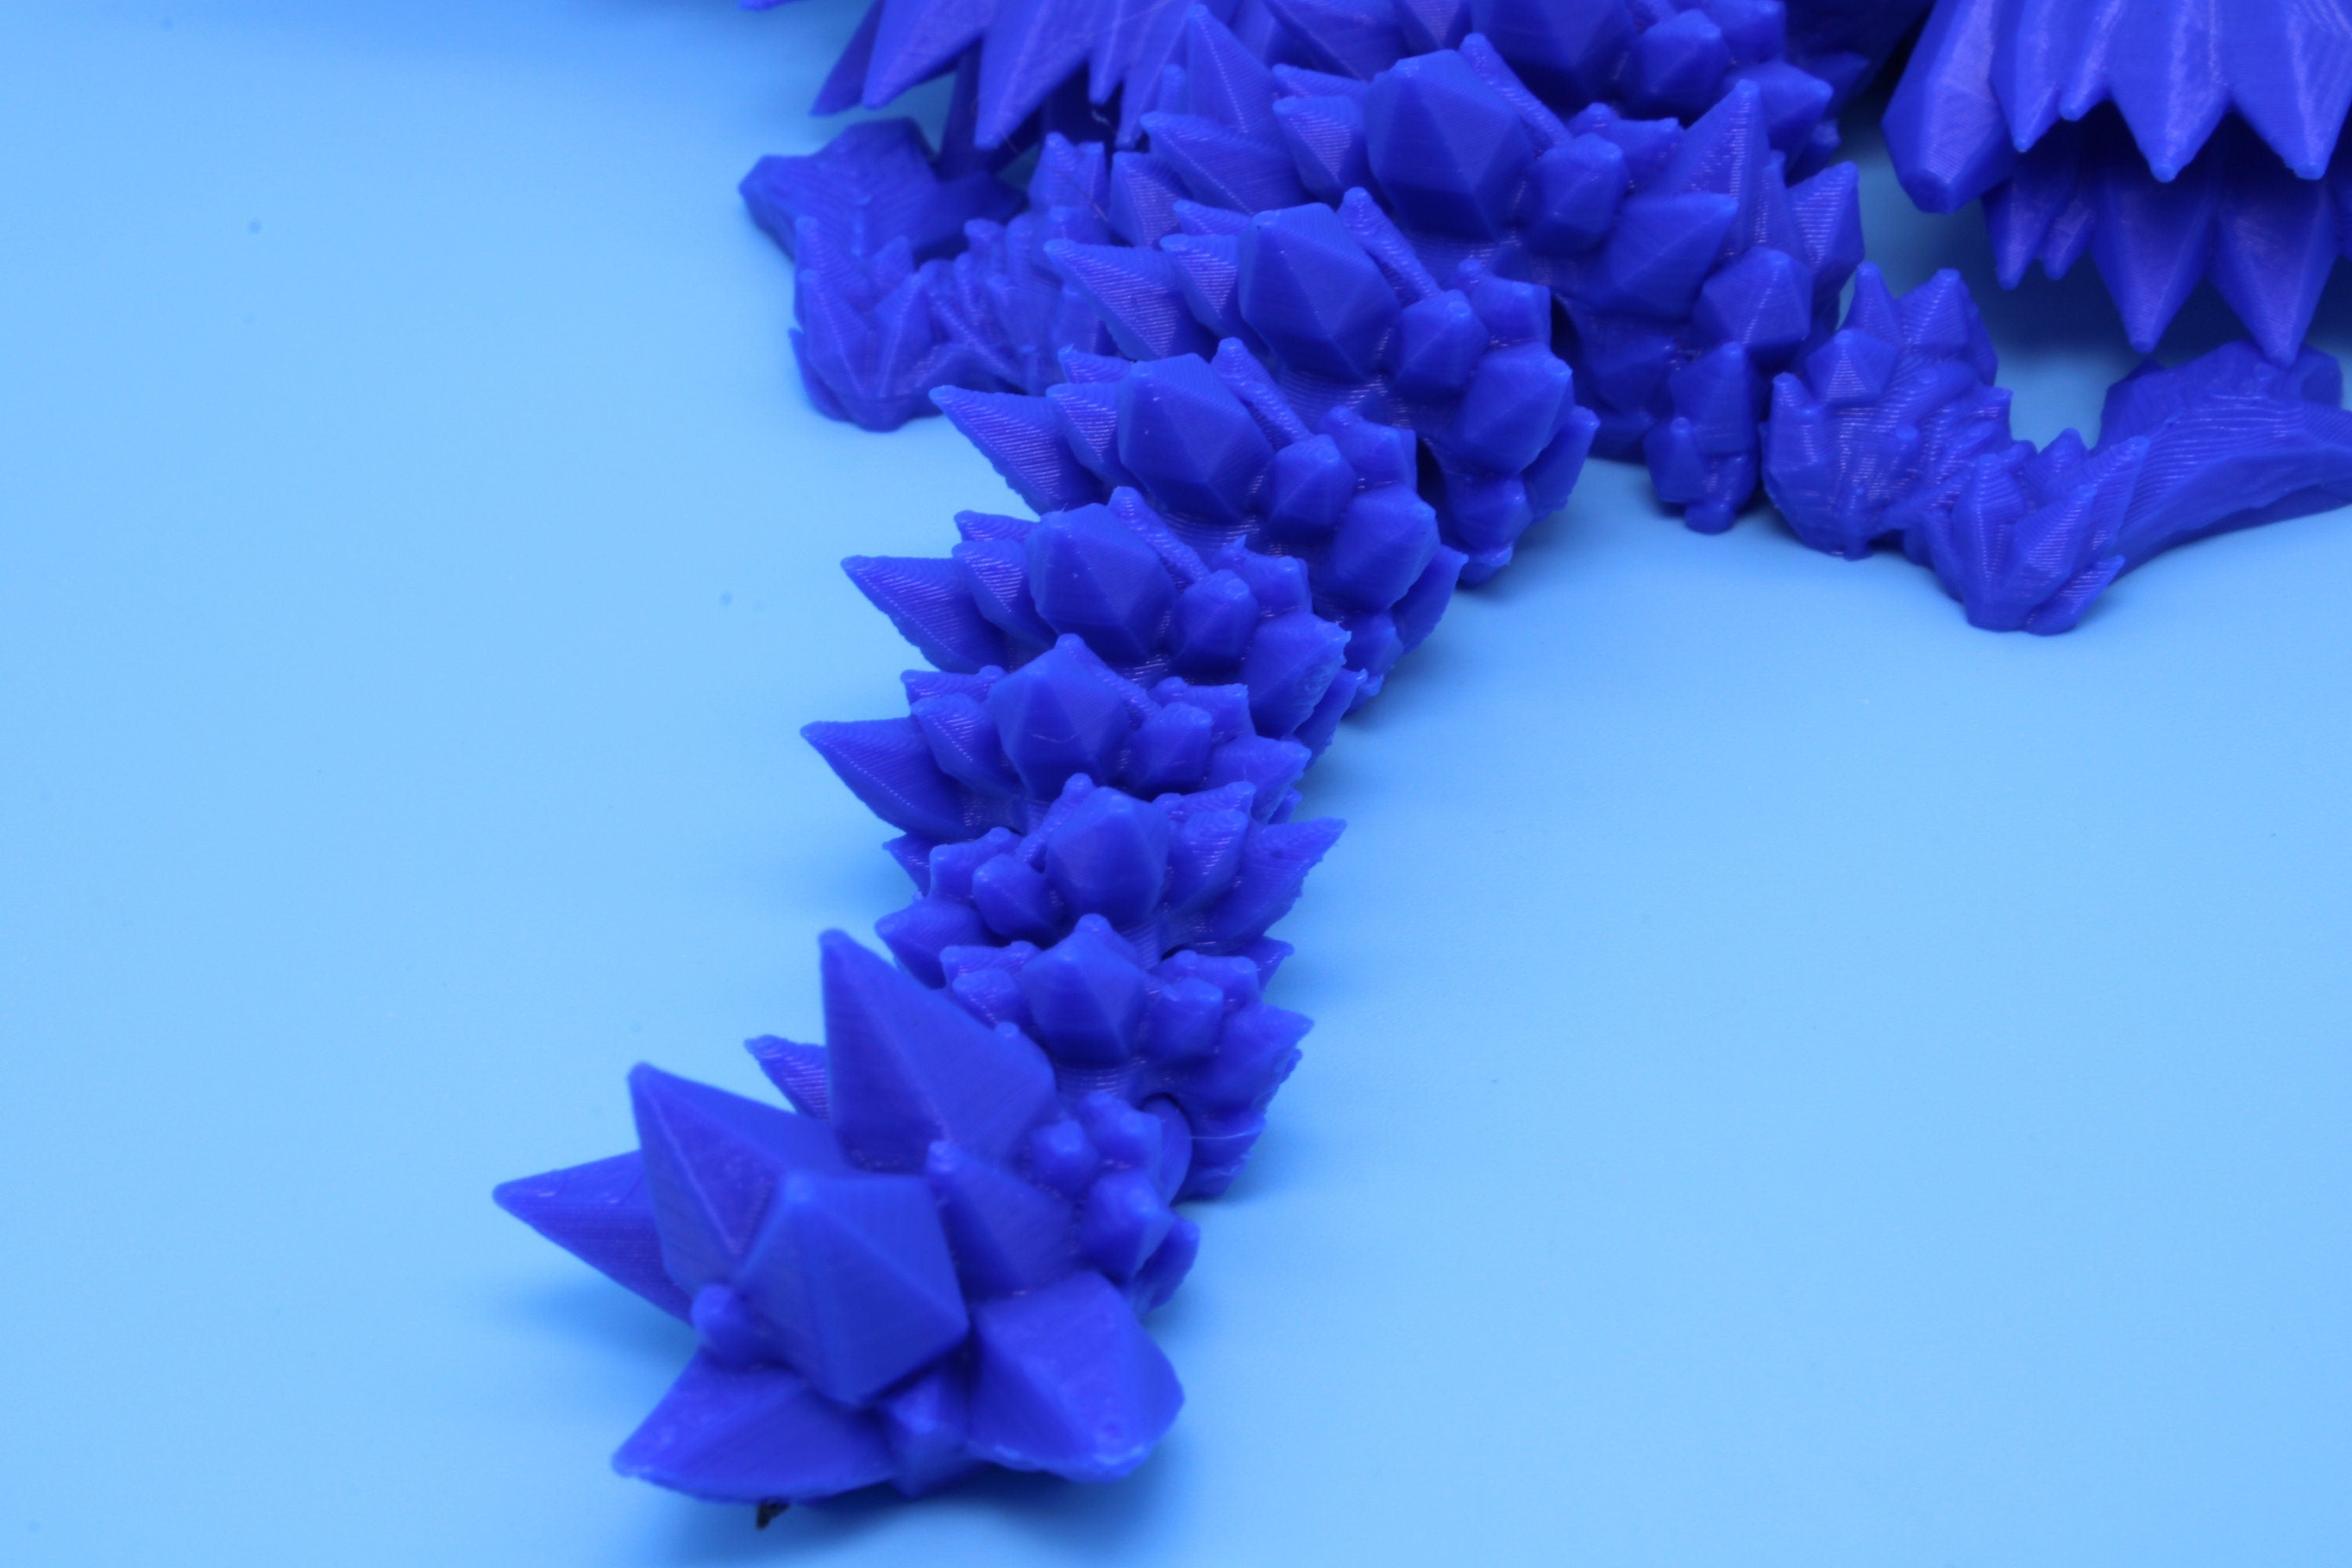 Baby Crystal Wing Dragon- Blue | Miniature | 3D printed | 7 in.